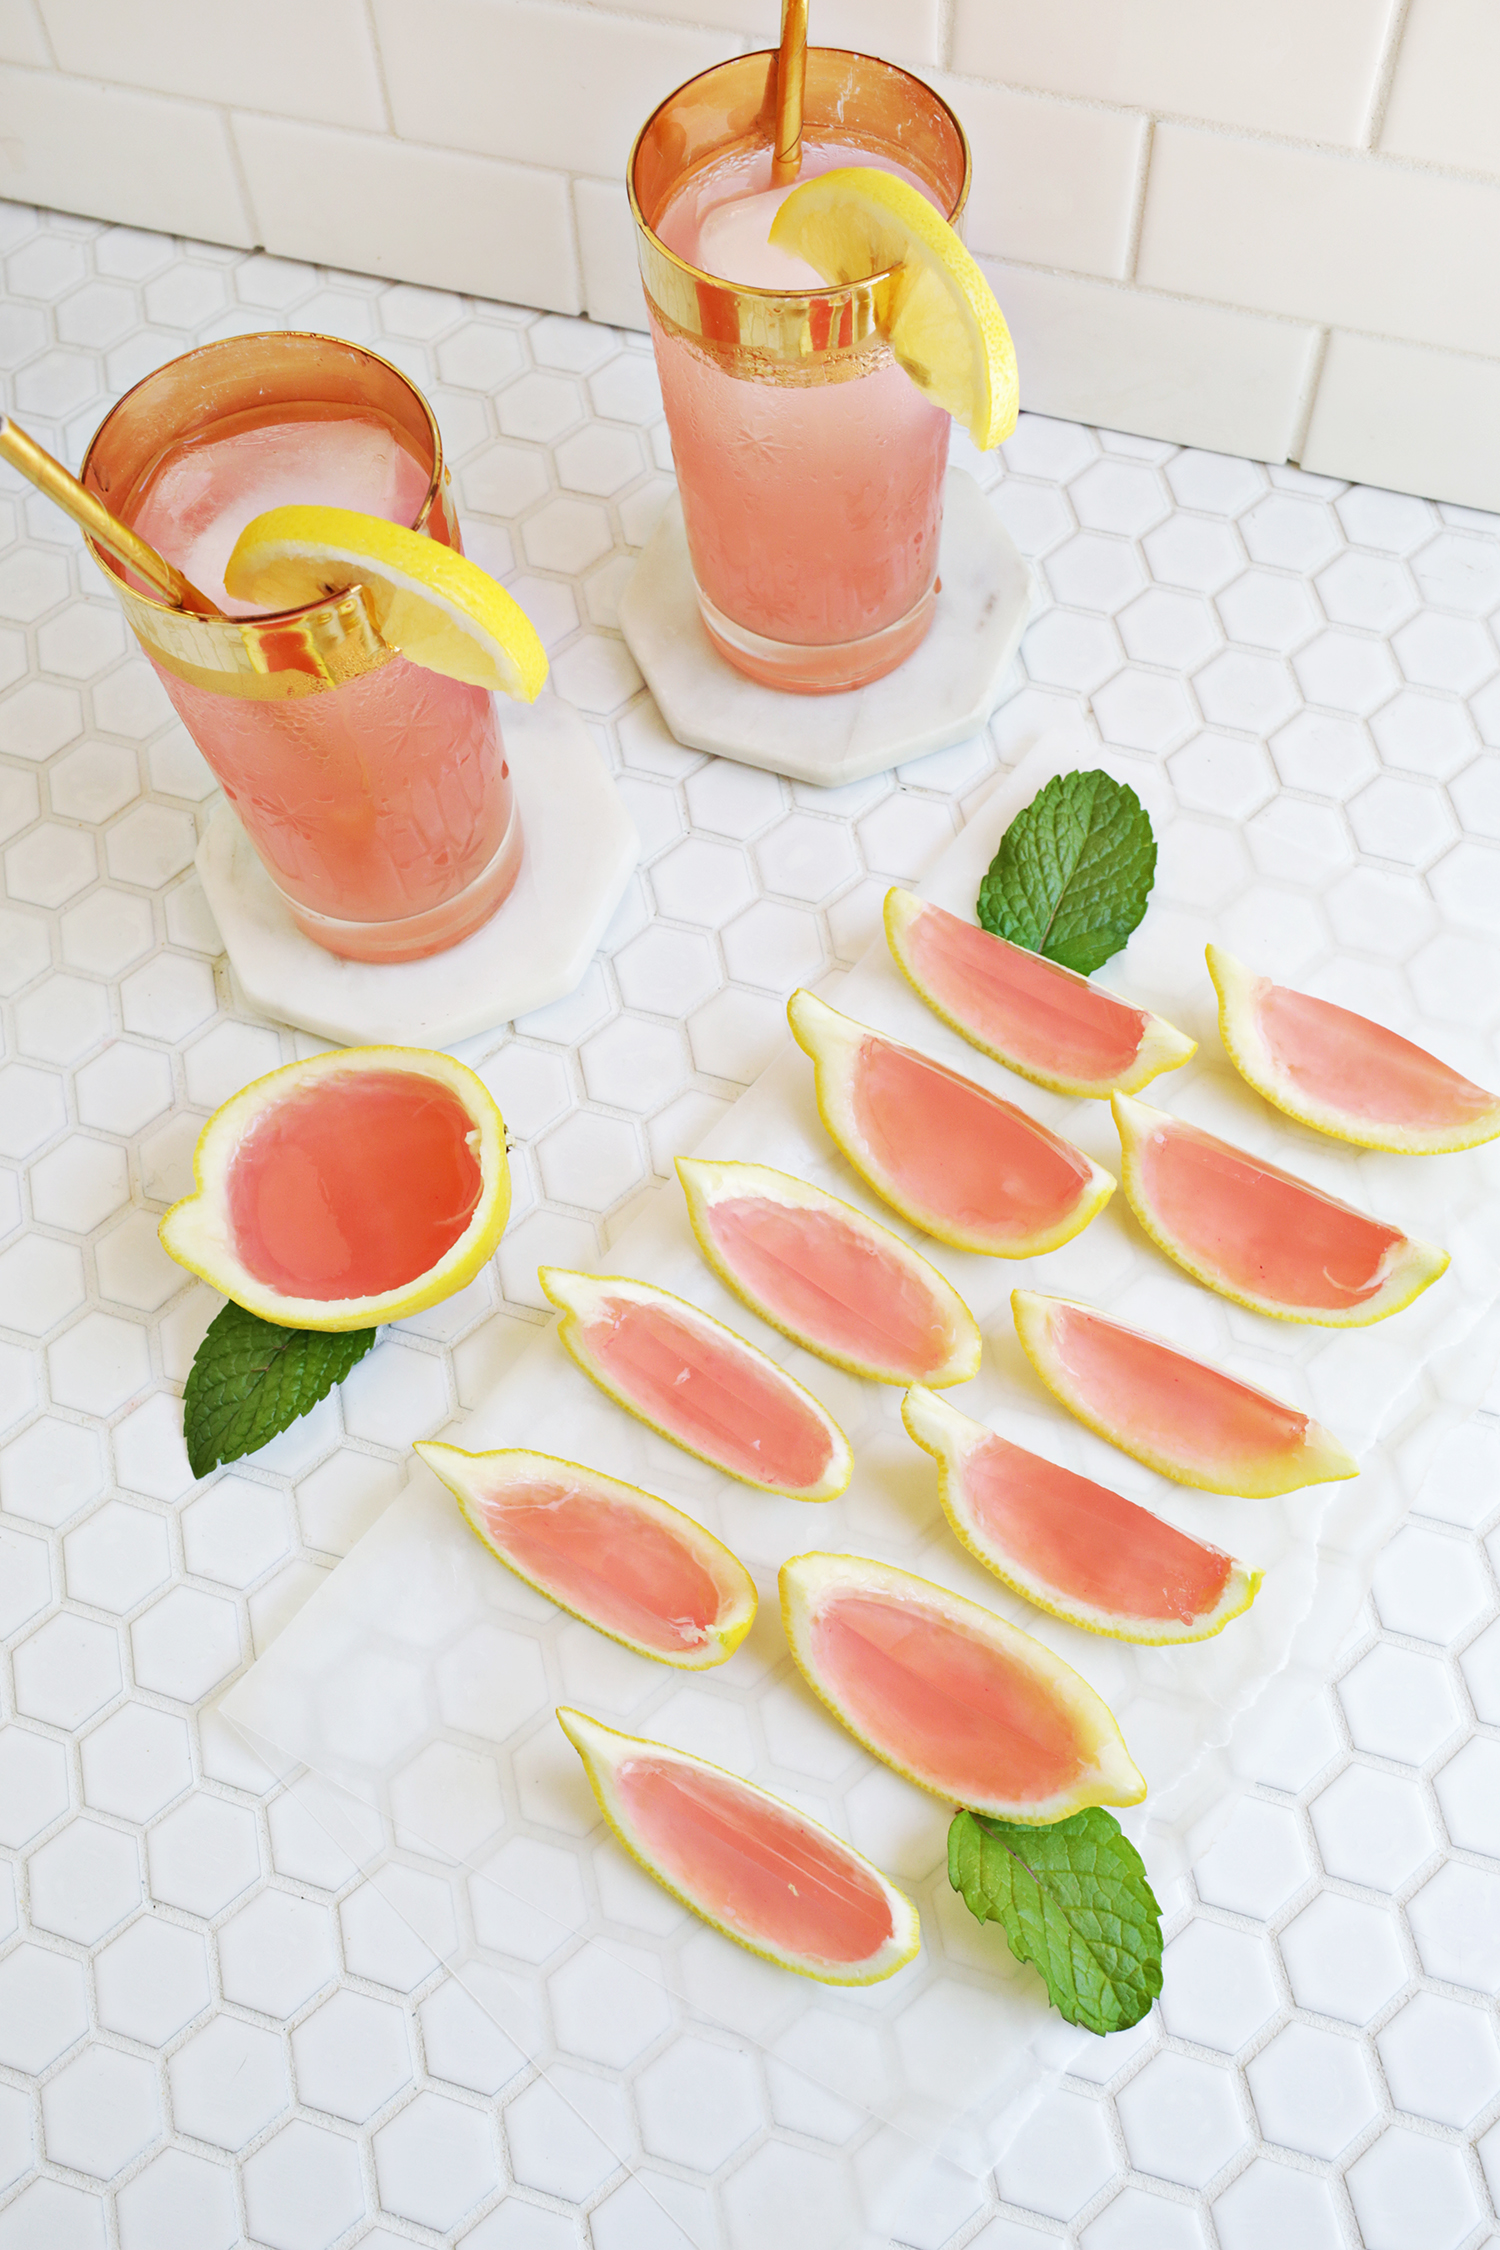 summer treats on a budget you can enjoy at home. host happy hour at your home.